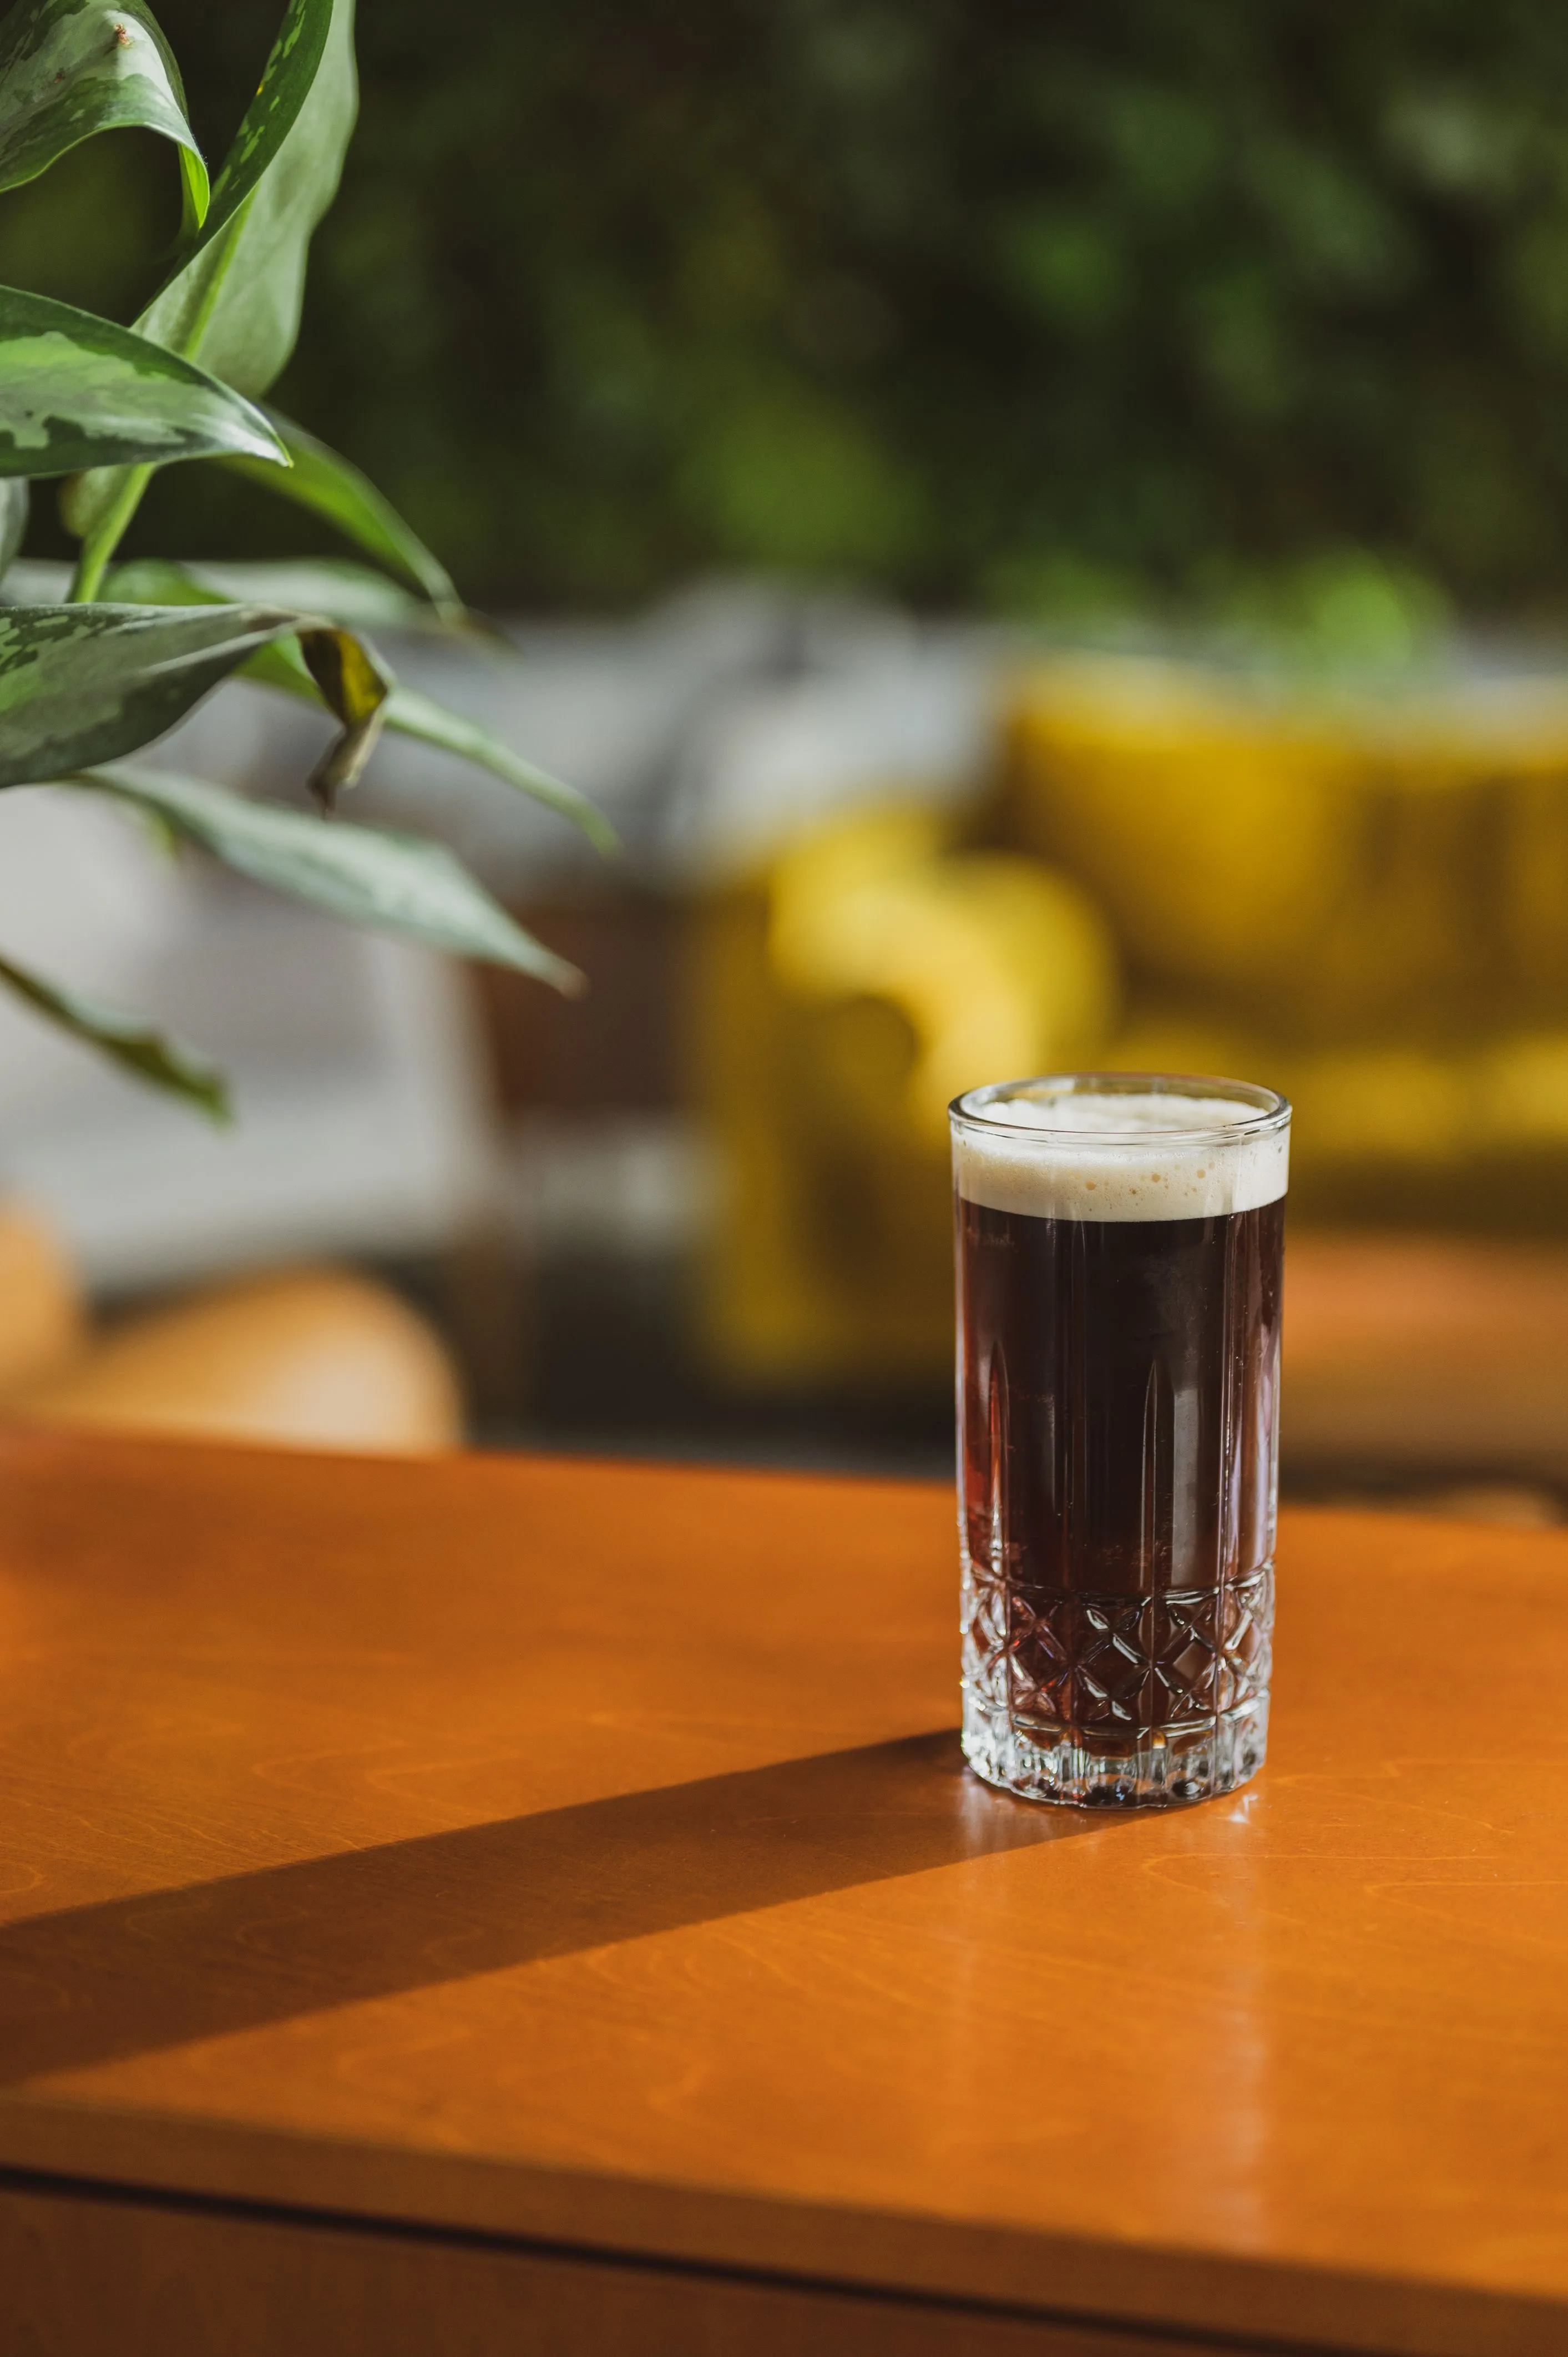 A glass of dark beer with a frothy head on a wooden surface, with a blurred background featuring green leaves and citrus fruits.